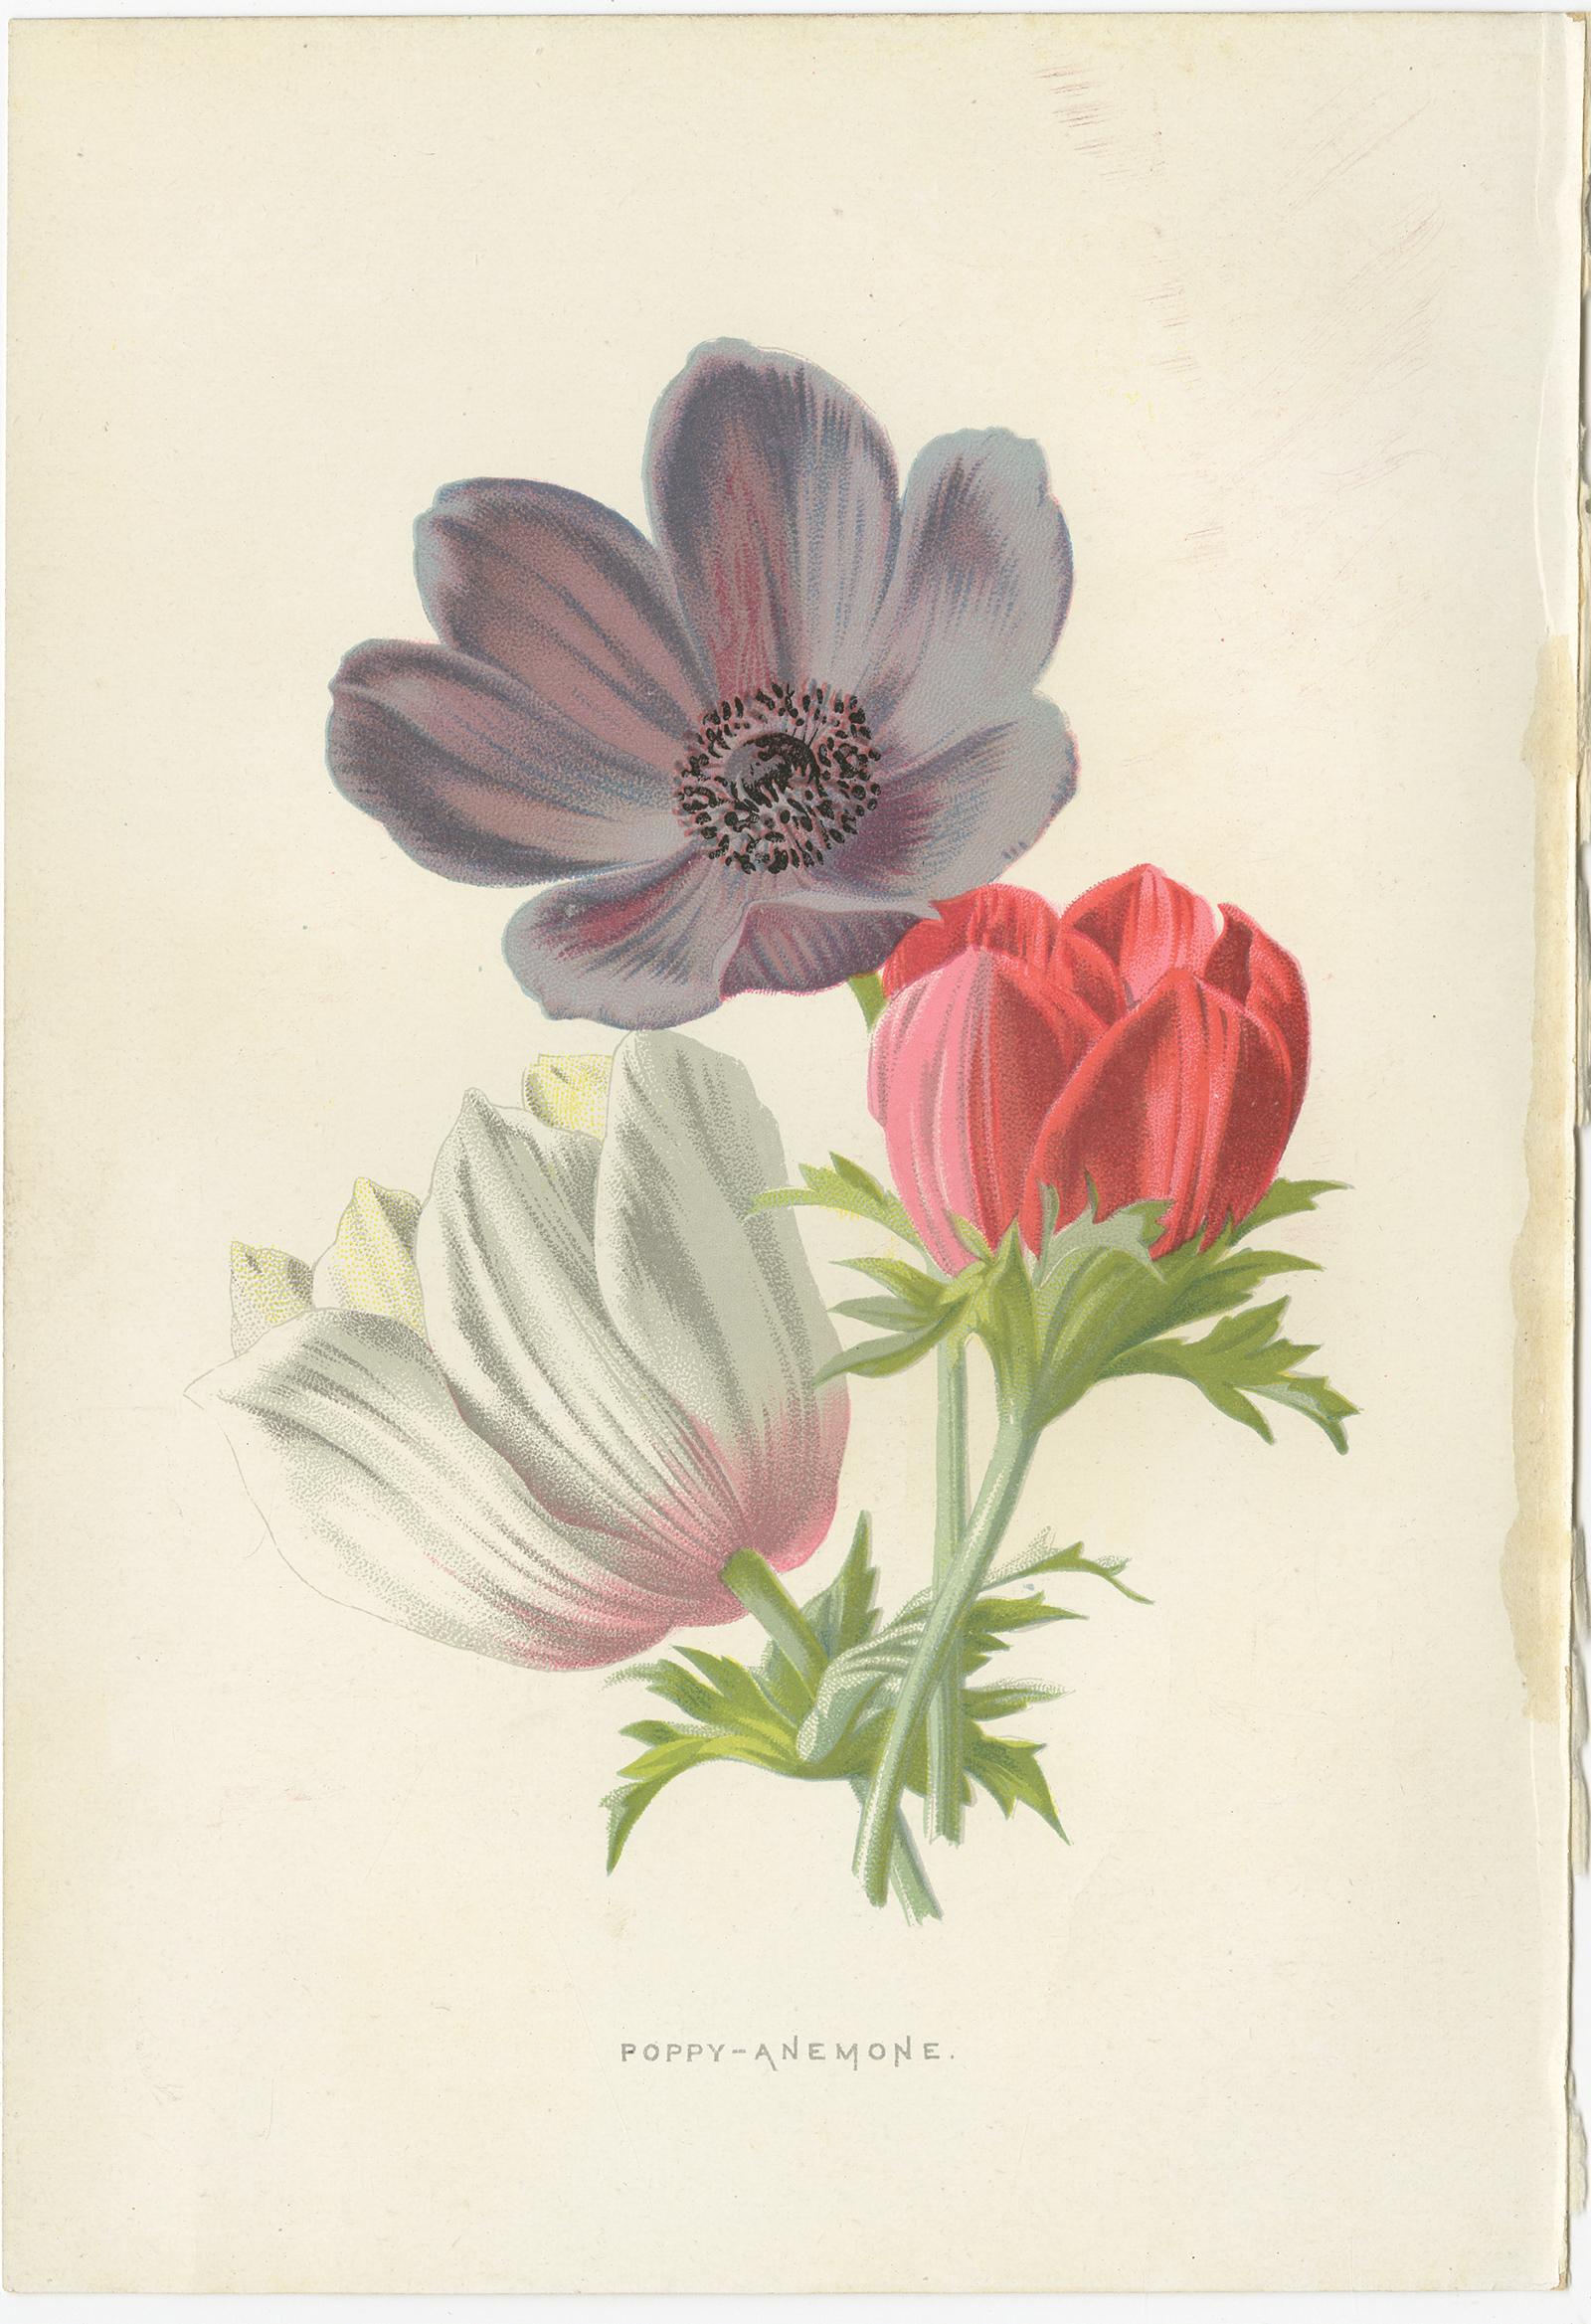 Set of three antique chromolithographs titled 'Poppy-Anemone - Rudbeckia - Cineraria'. These prints originate from 'Familiar Garden Flowers' by F. Edward Hulme & Shirley Hibberd. Published in circa 1880.